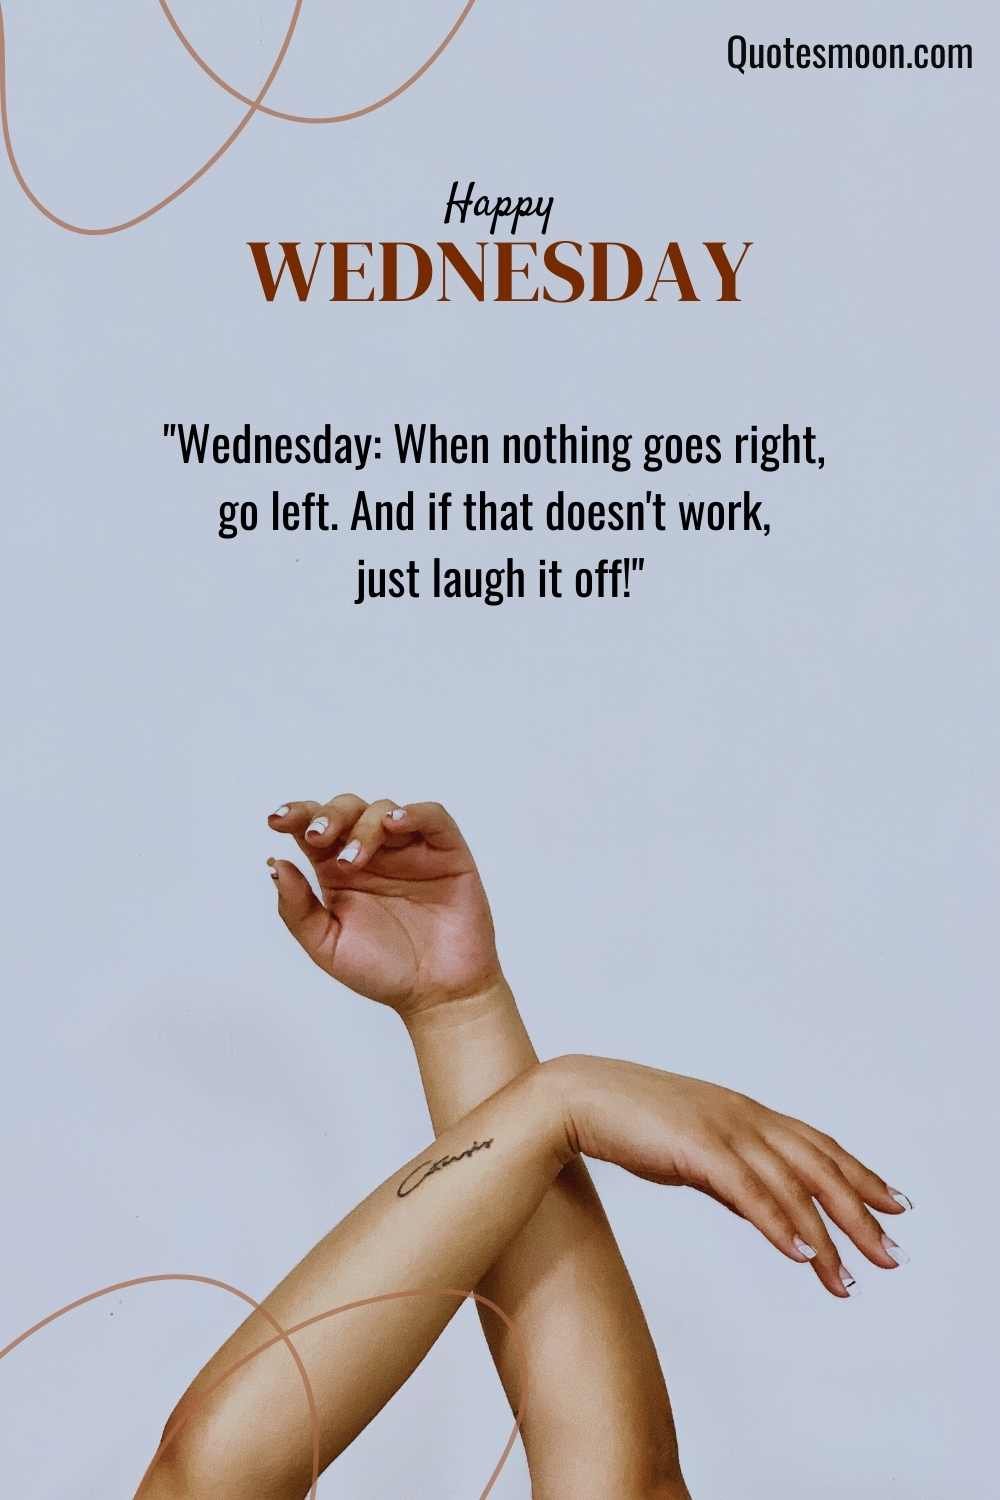 Wednesday Quotes for a hump day with images new